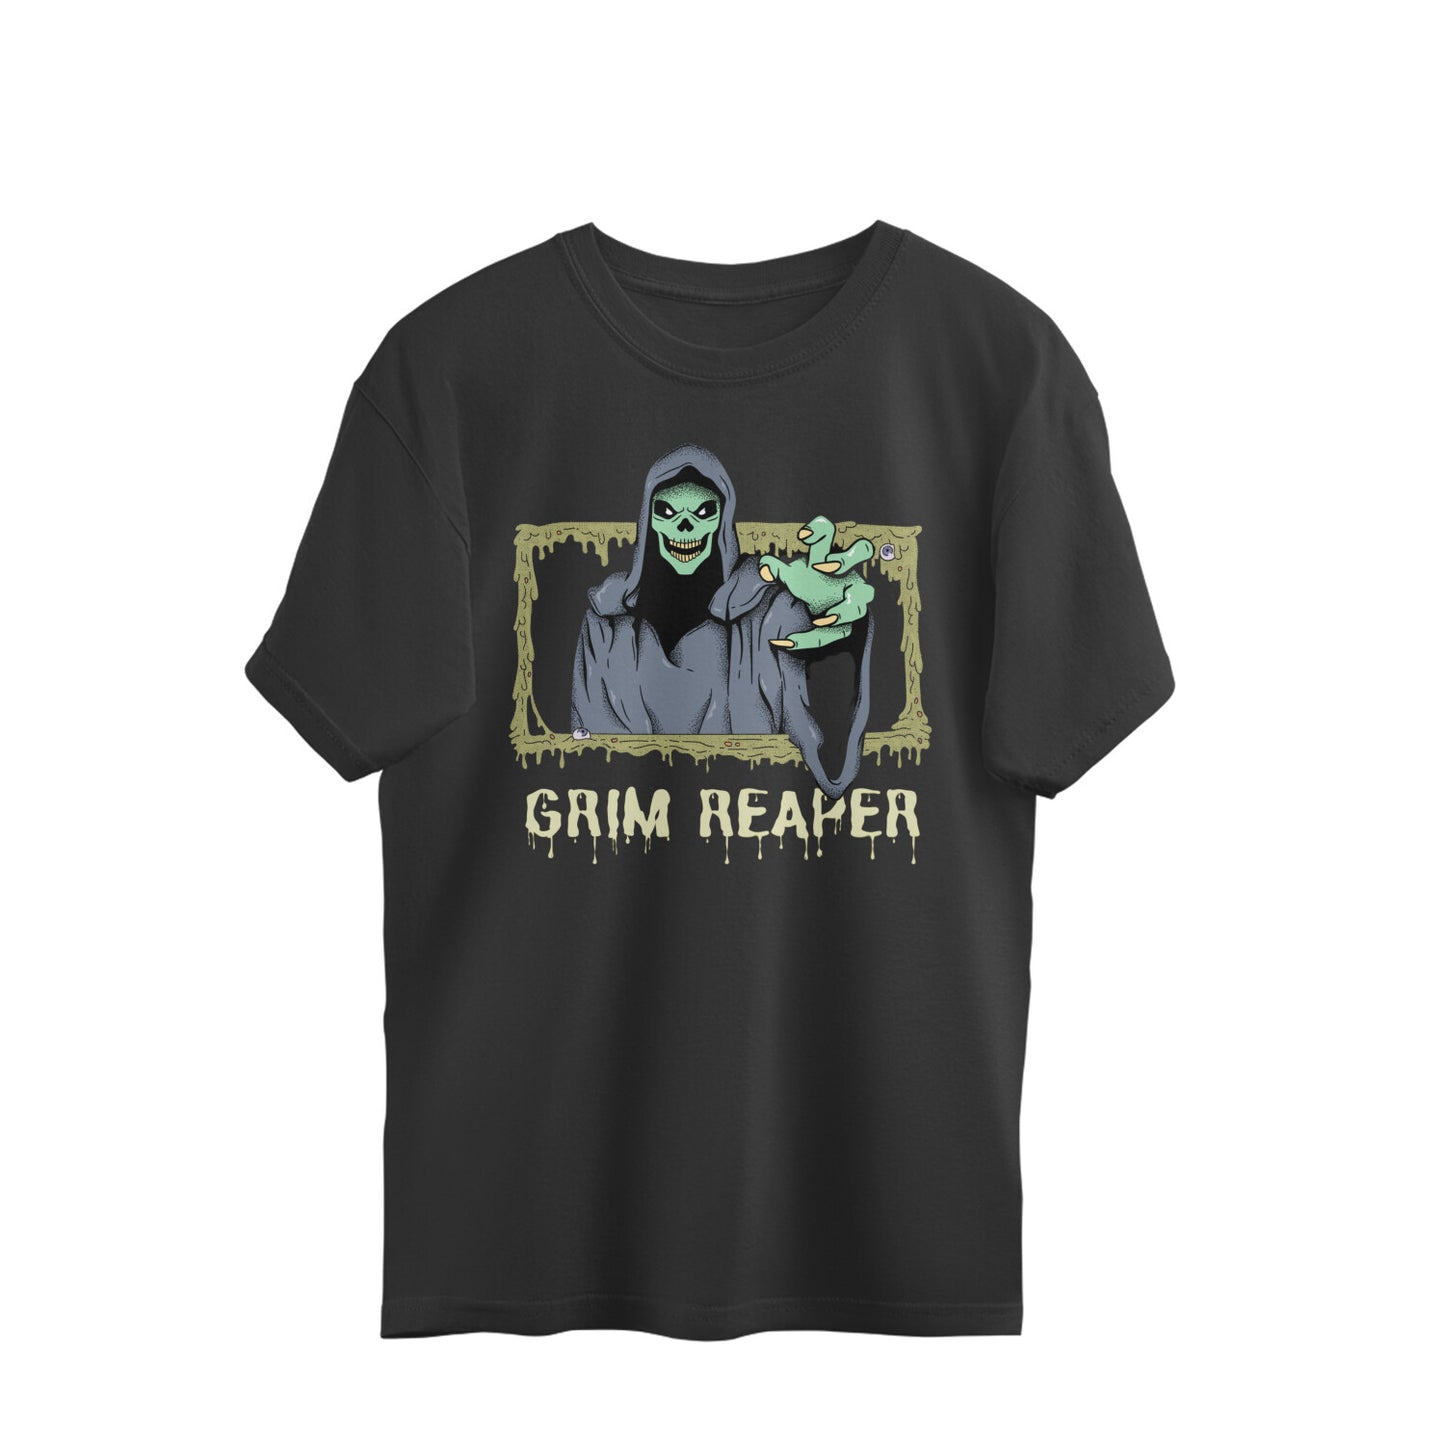 Grim Reaper Over sized T-shirt